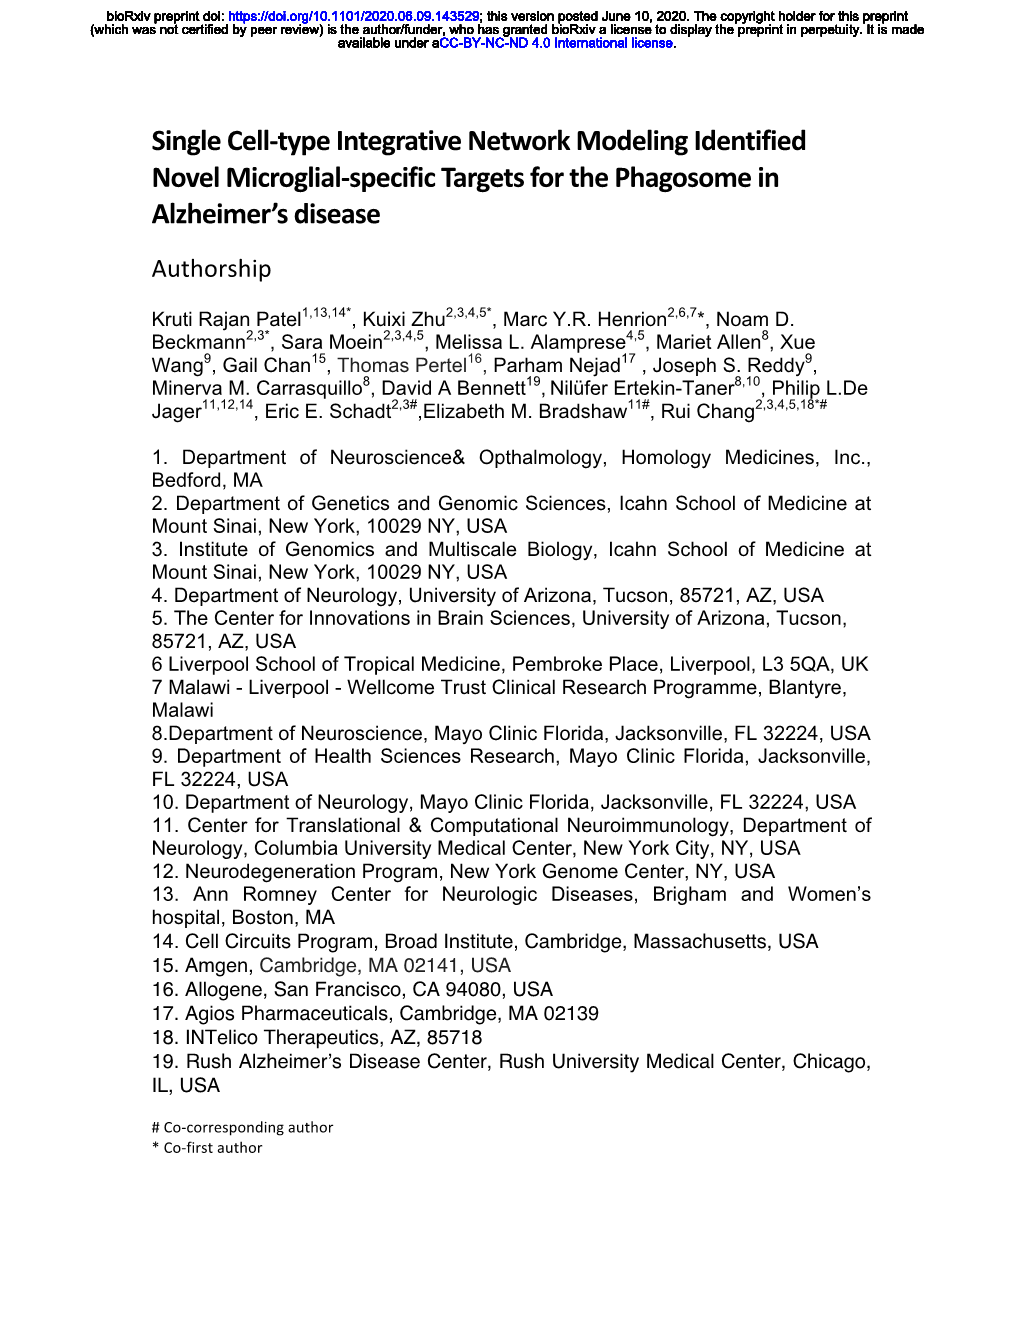 Single Cell-Type Integrative Network Modeling Identified Novel Microglial-Specific Targets for the Phagosome in Alzheimer's Di